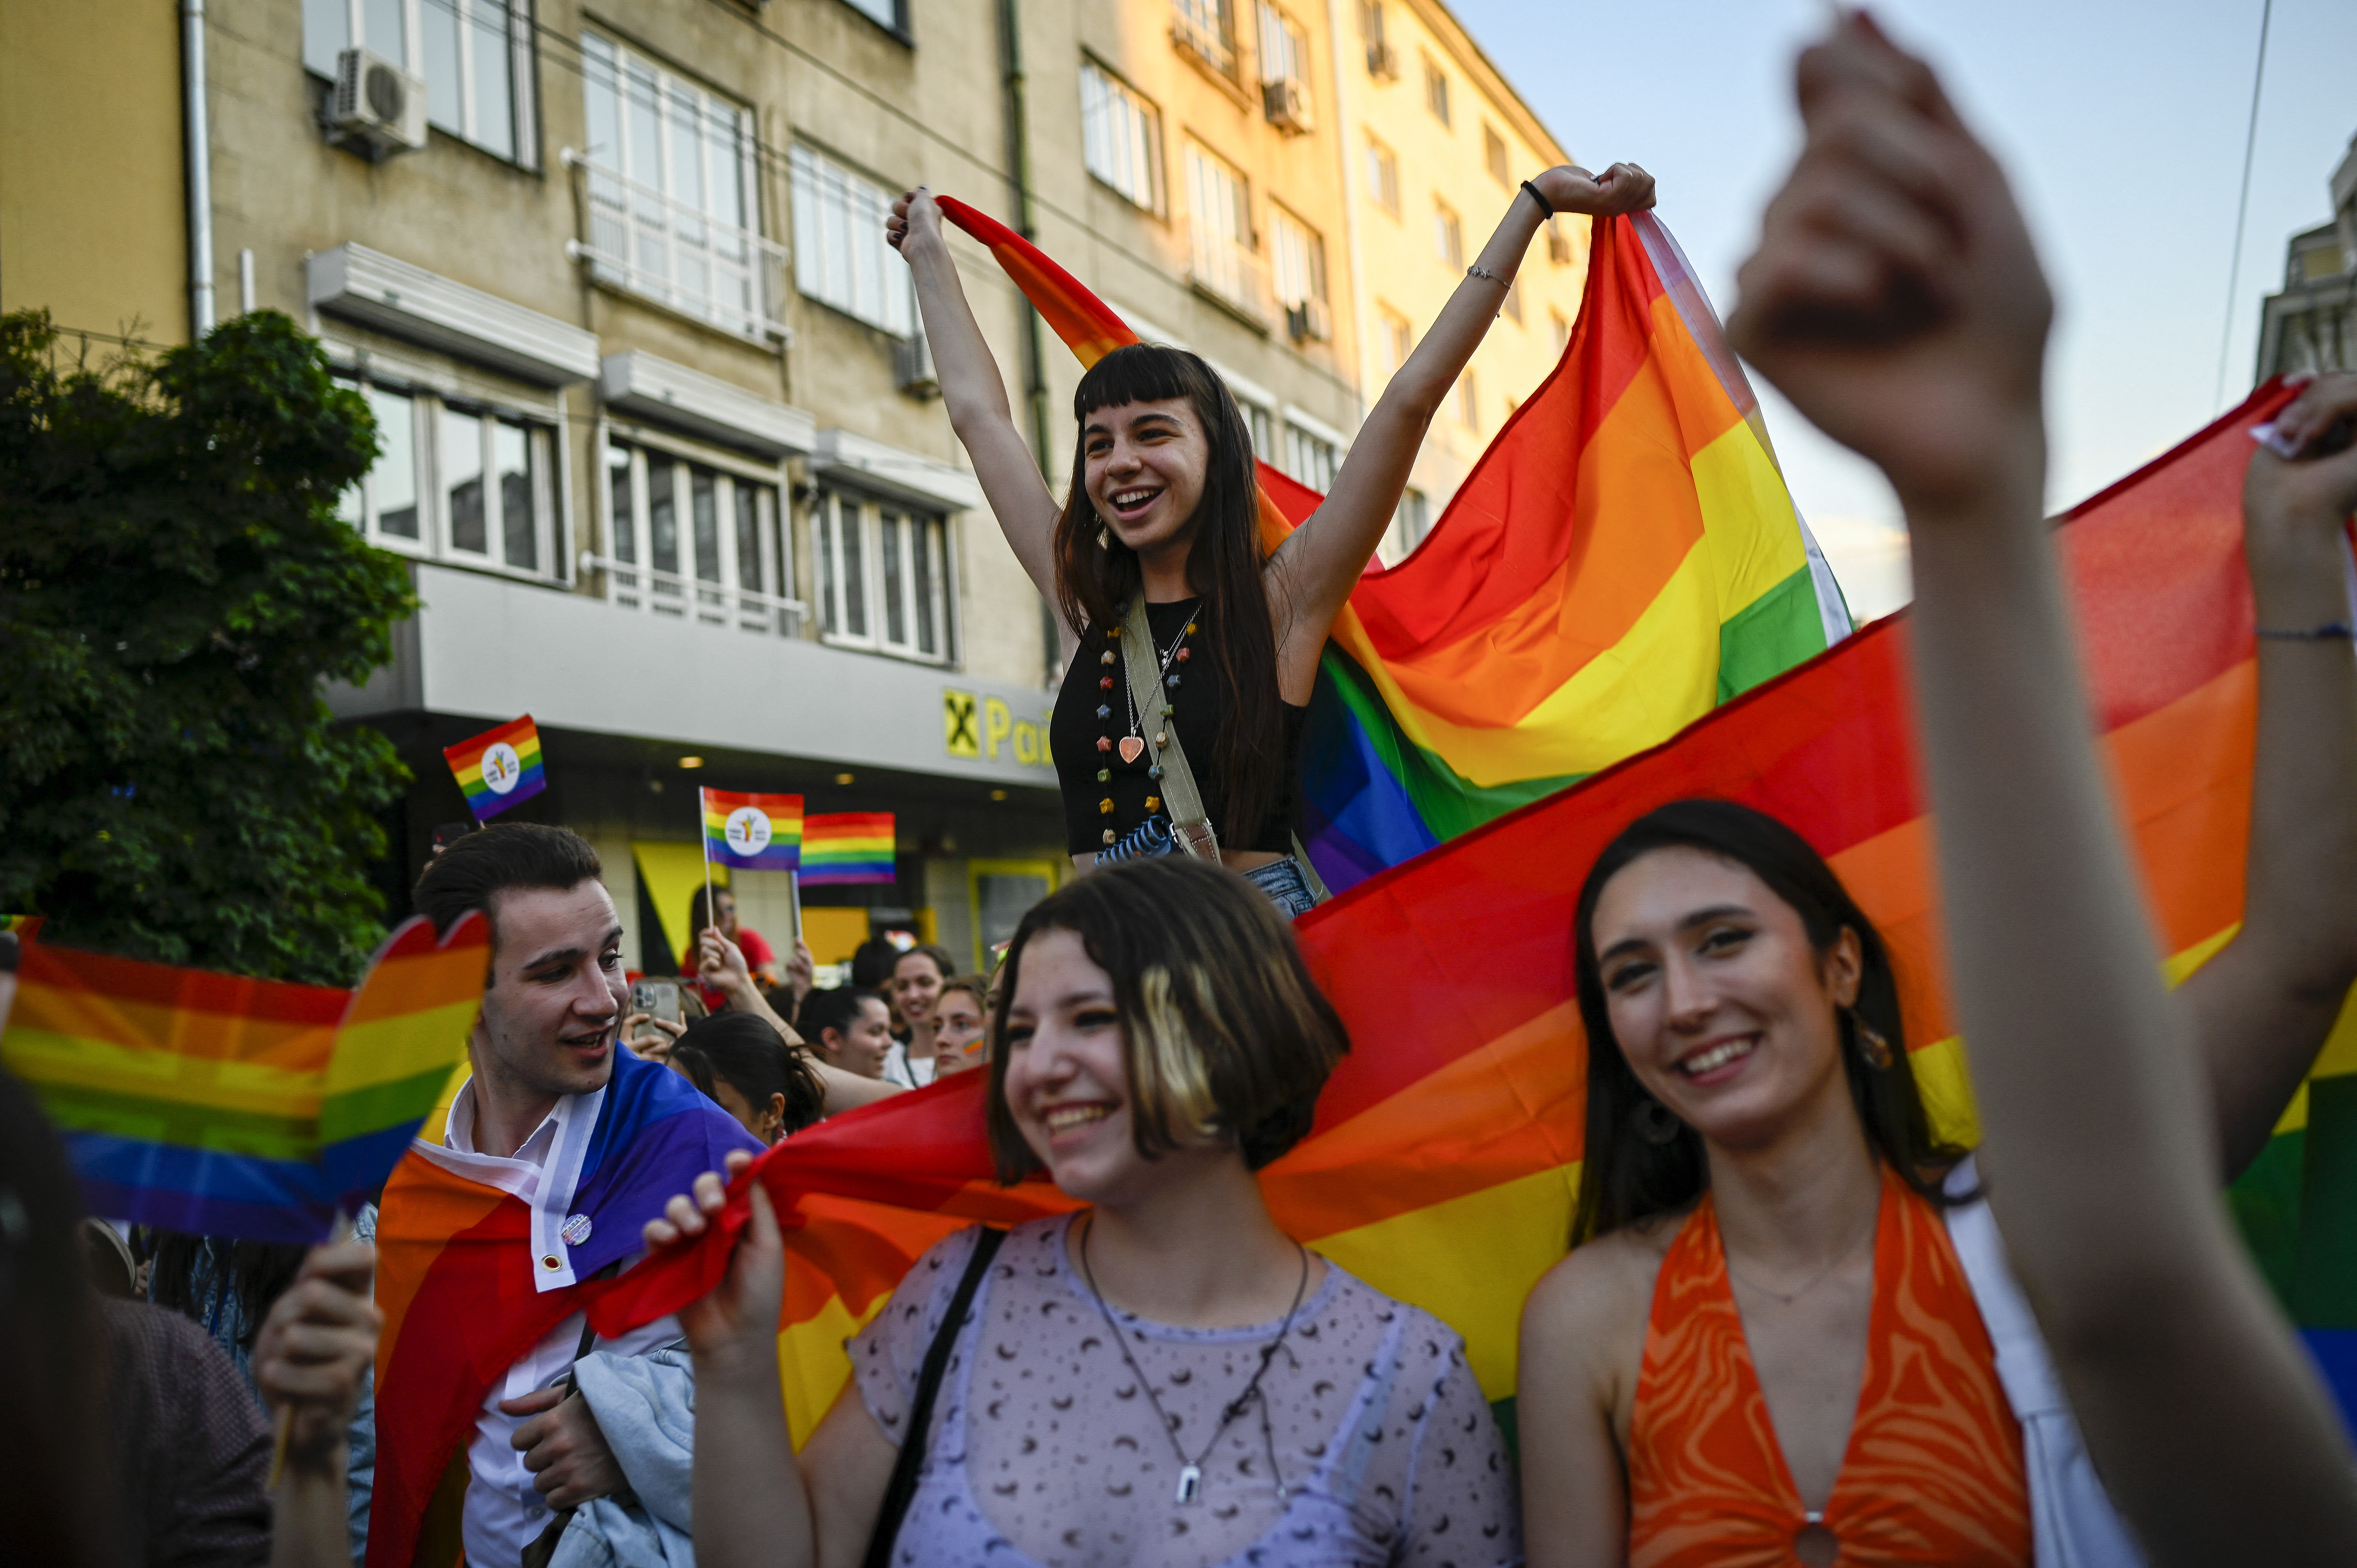 An international student's guide to Pride